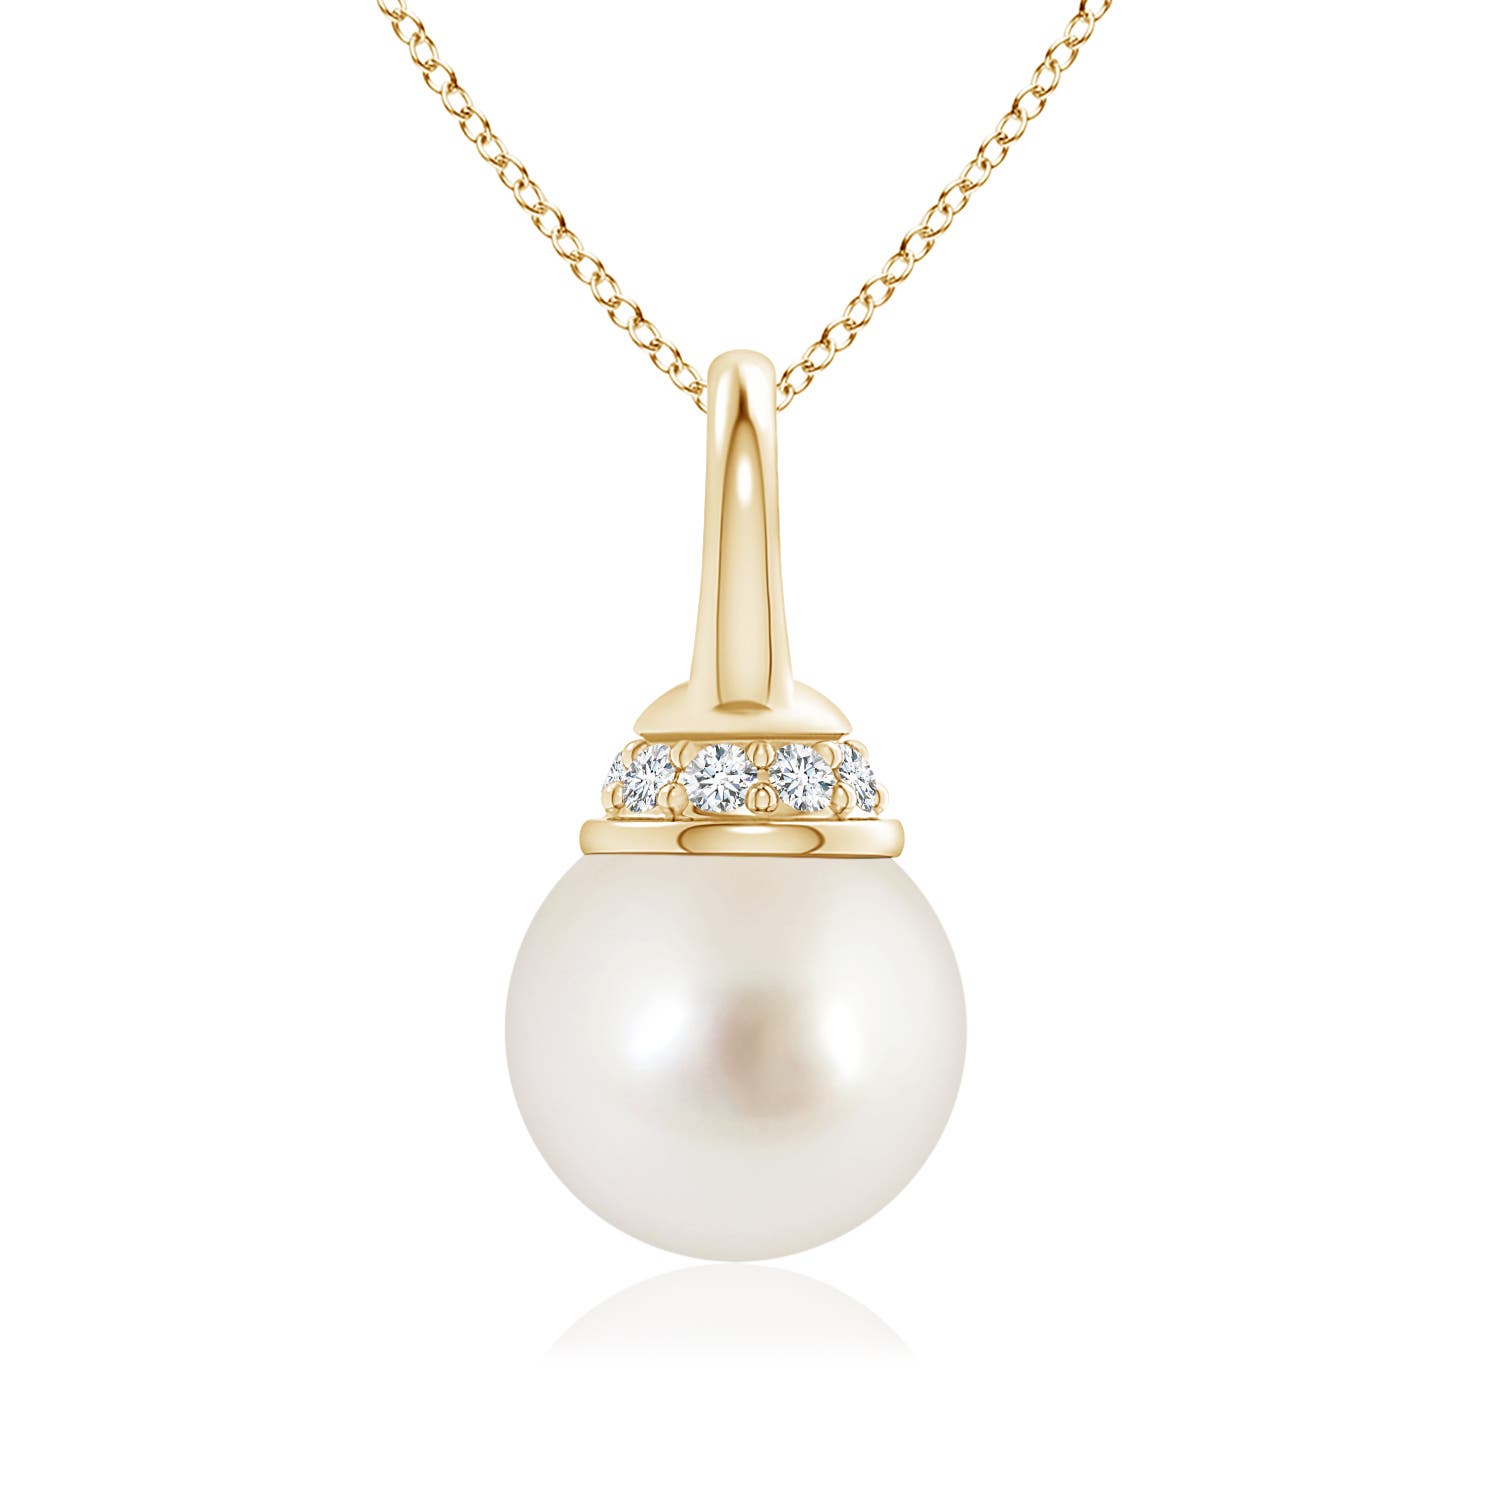 AAAA - South Sea Cultured Pearl / 3.79 CT / 14 KT Yellow Gold